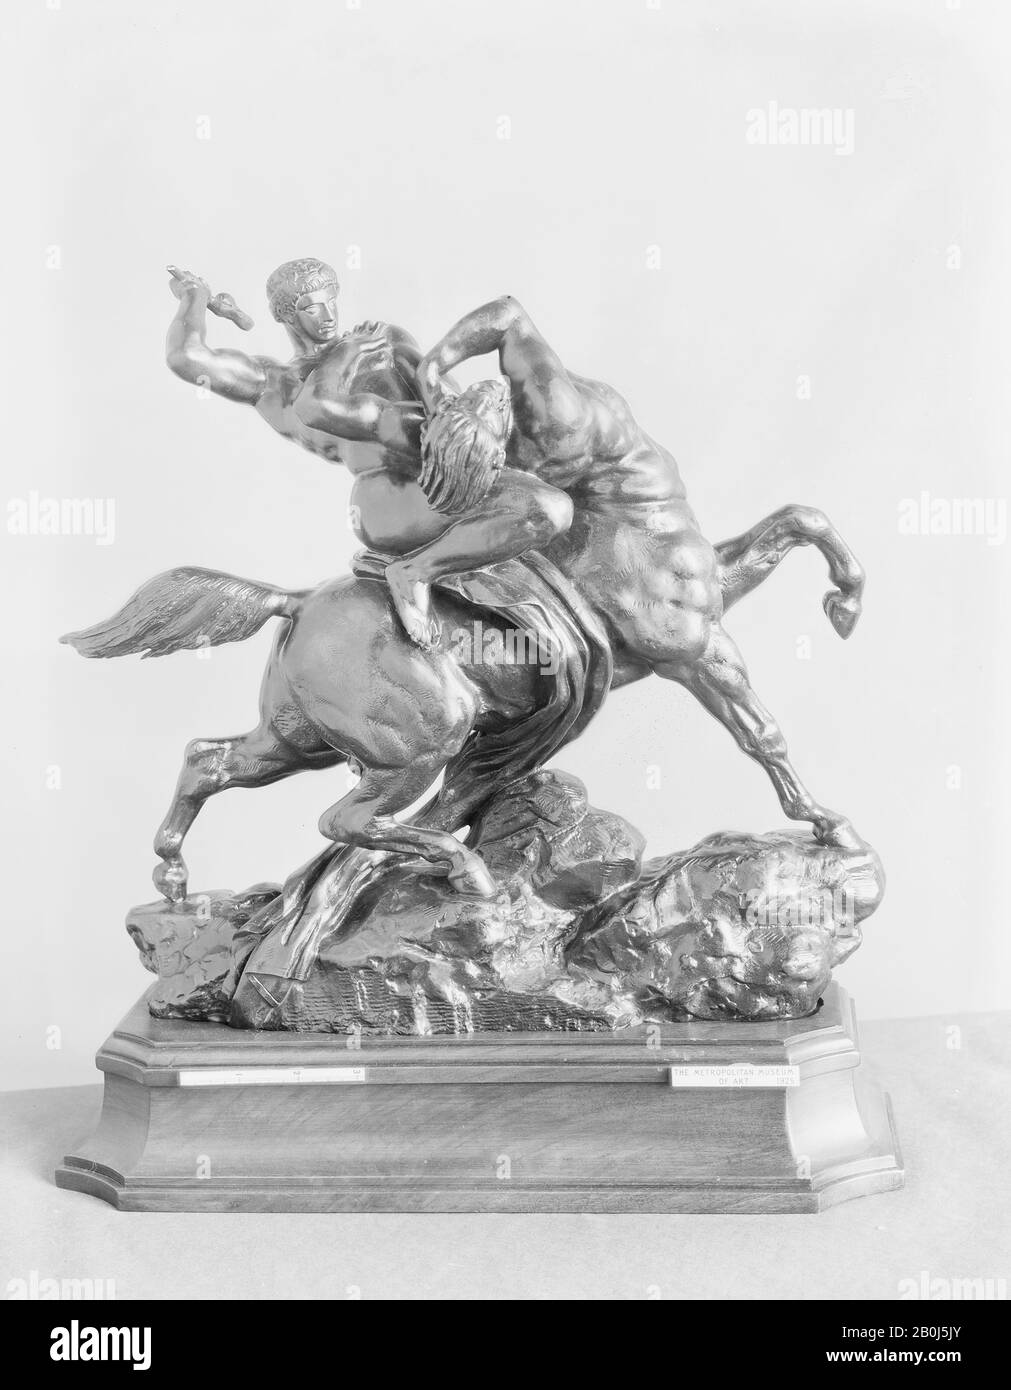 Antoine-Louis Barye, Theseus and the Centaur Bianor, French, Antoine-Louis Barye (French, Paris 1795–1875 Paris), modeled between 1846 and 1848, French, Bronze, Height: 13 1/4 in. (33.7 cm), Sculpture-Bronze Stock Photo